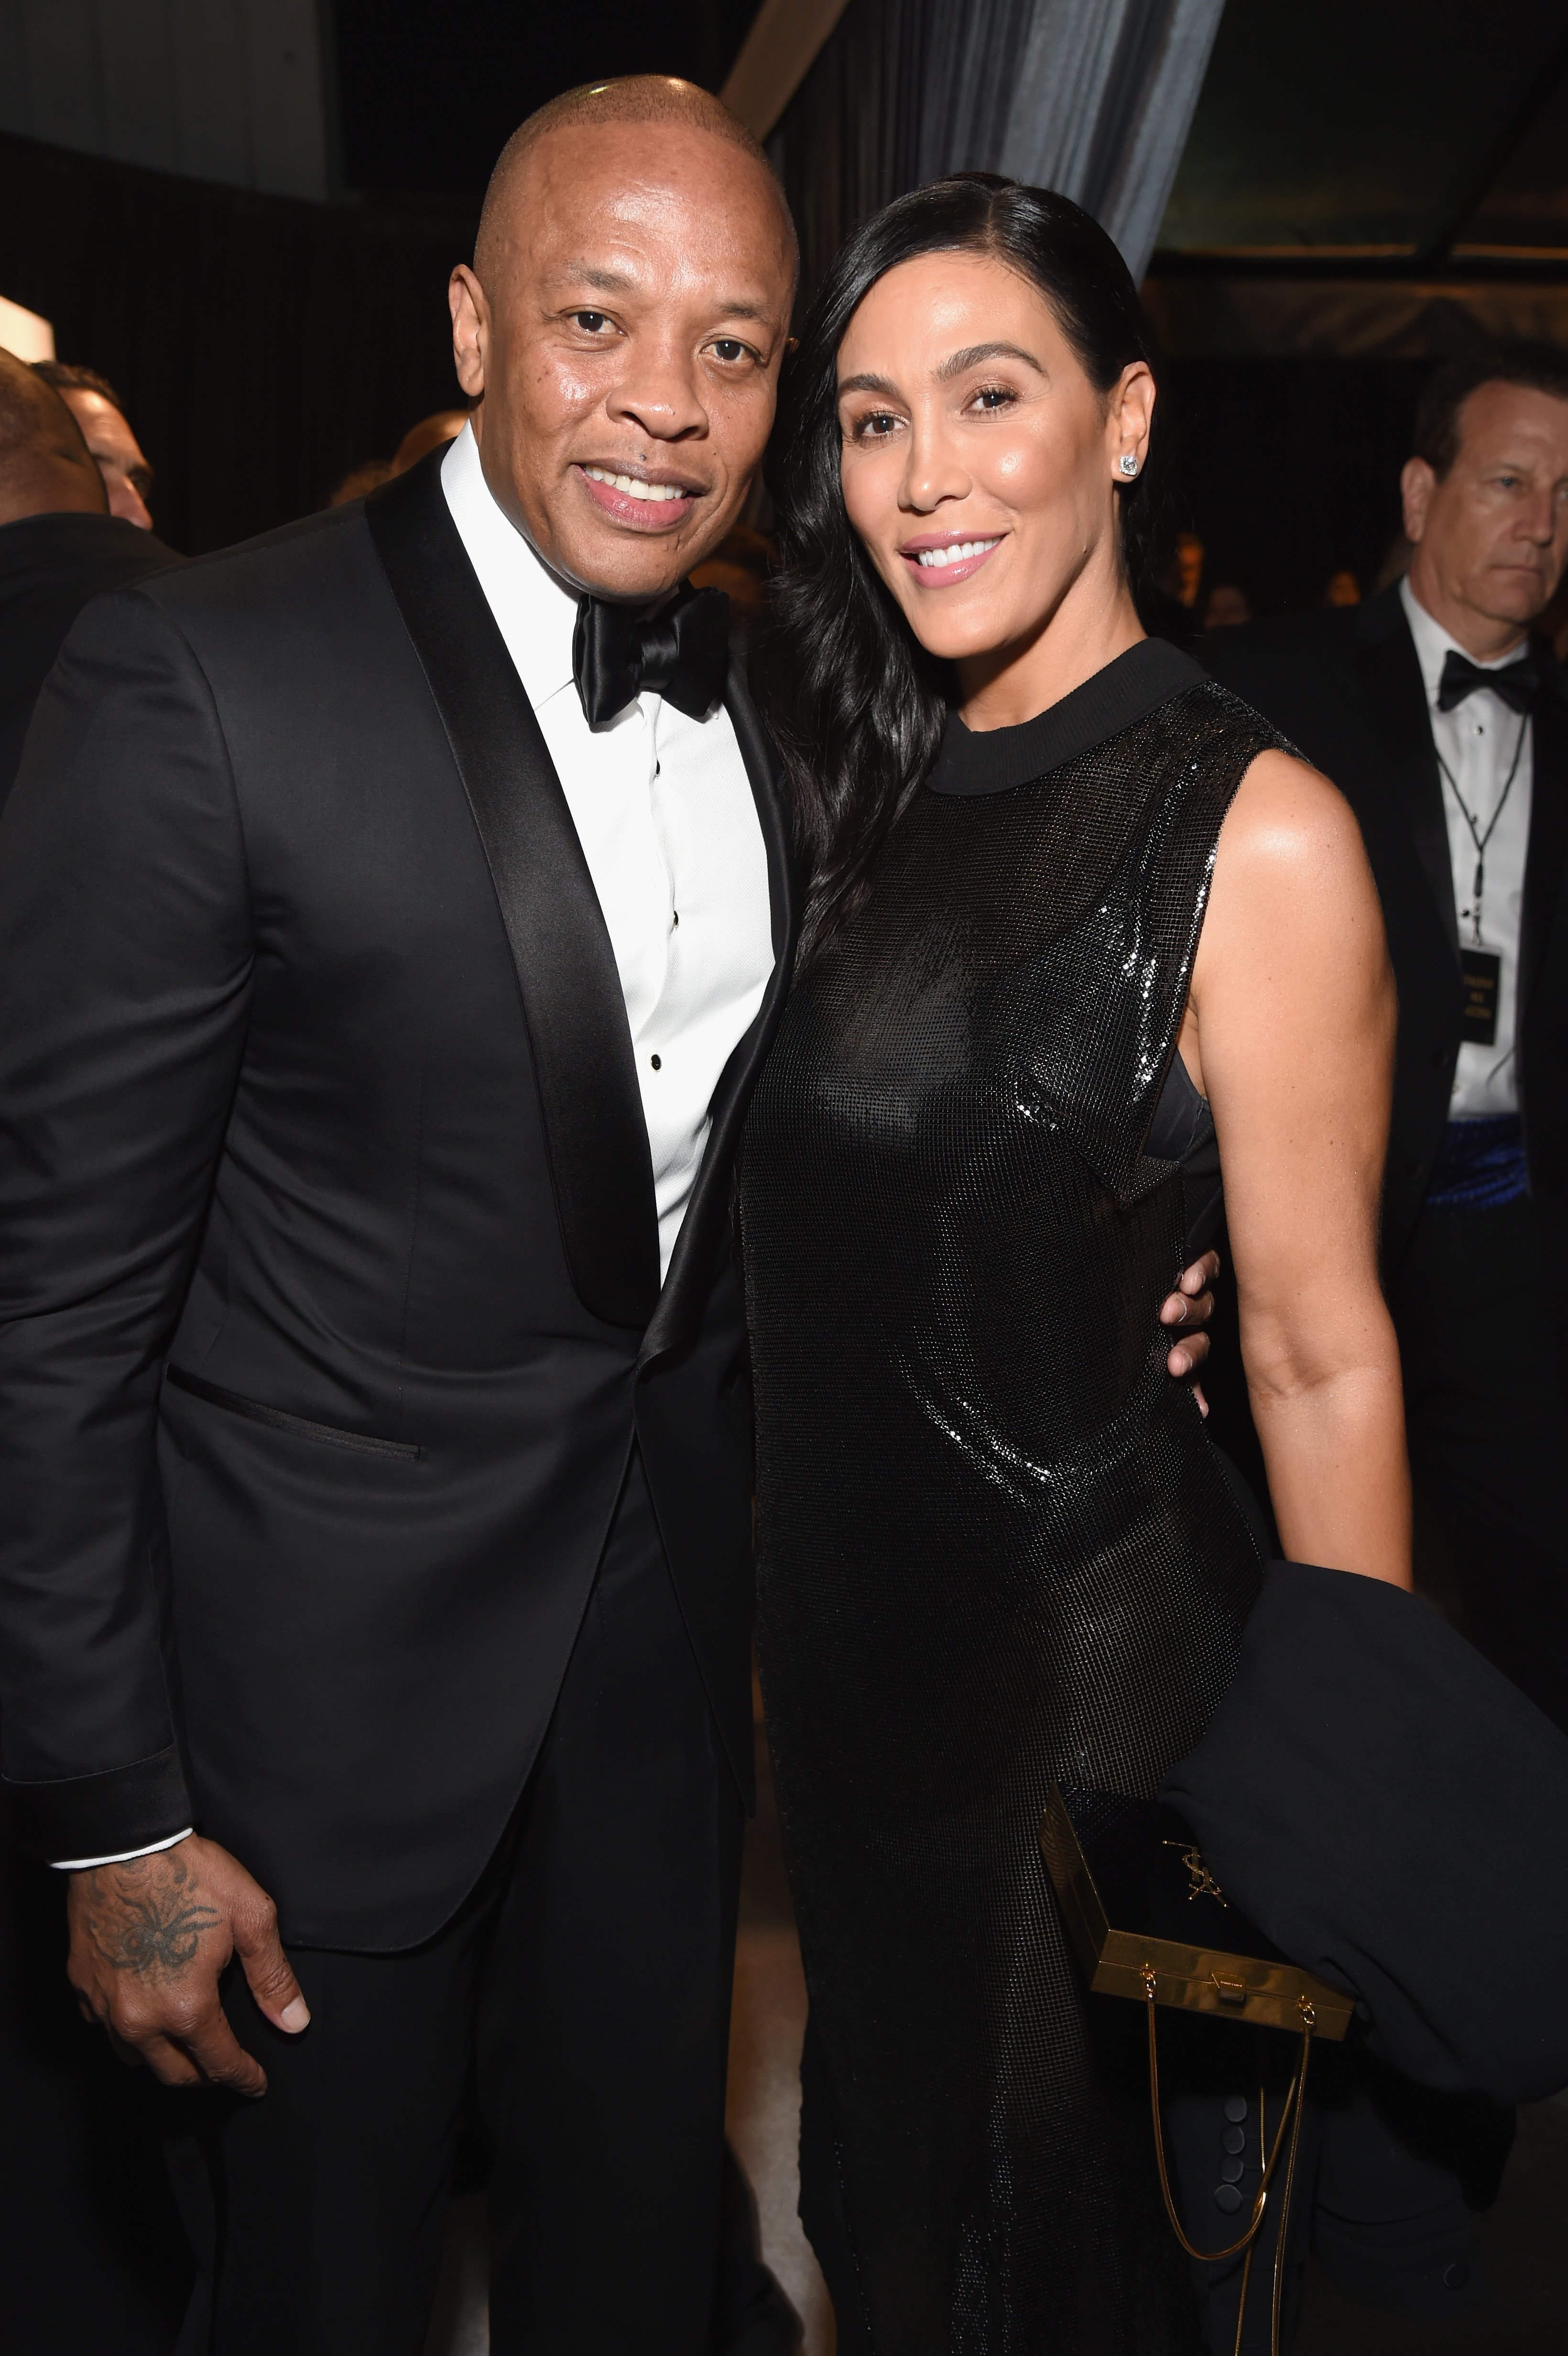 Dr. Dre and wife, Nicole Young during times, at the City of Hope Spirit of Life Gala on October 11, 2018 in Santa Monica. | Photo: Getty Images.